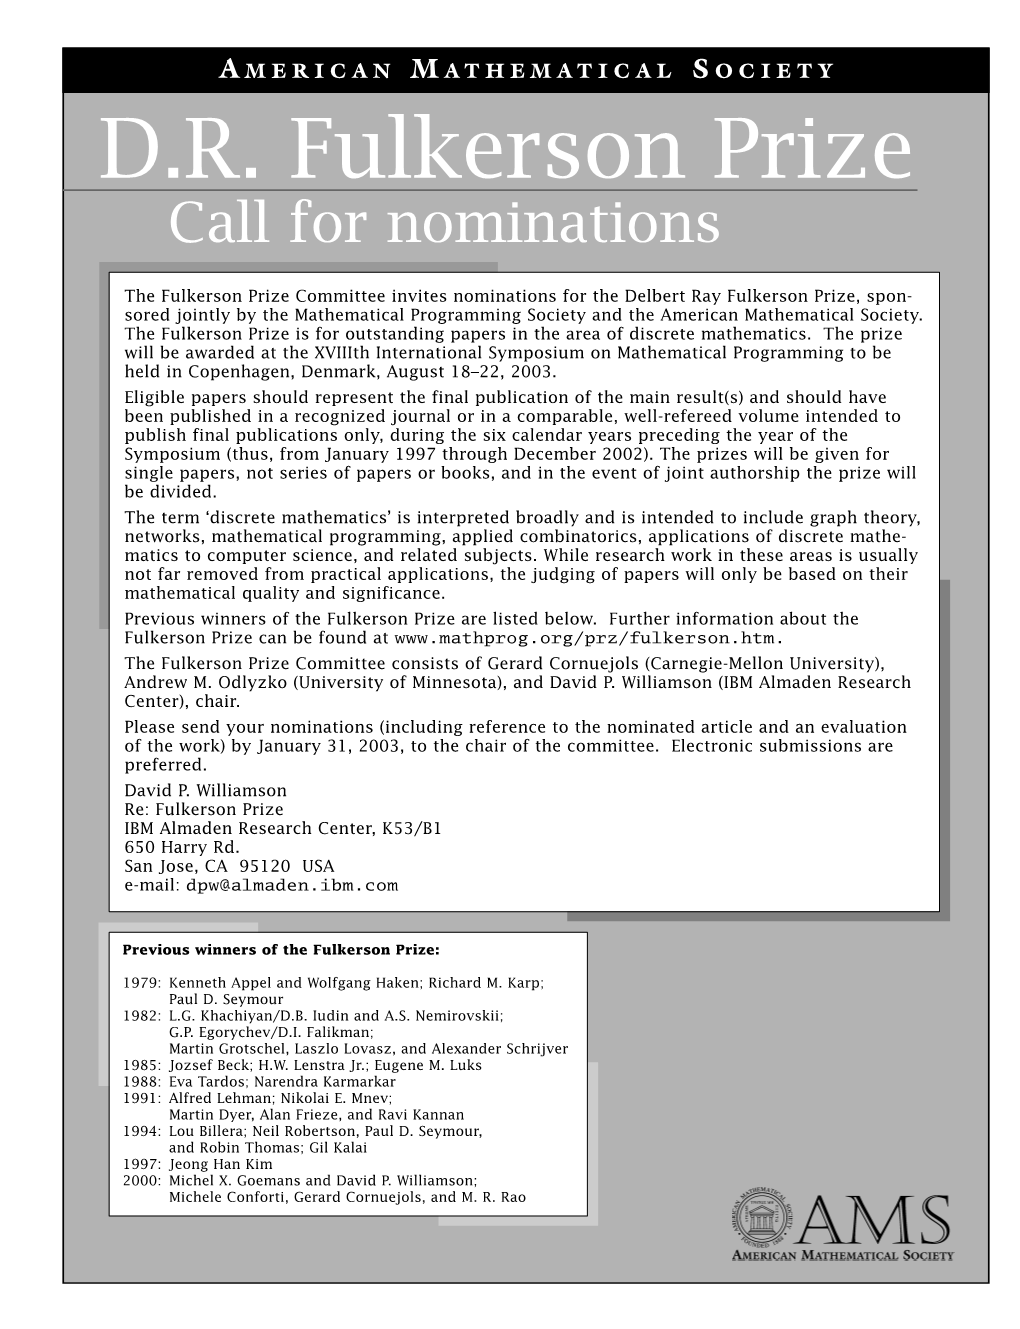 Call for Nominations for D. R. Fulkerson Prize